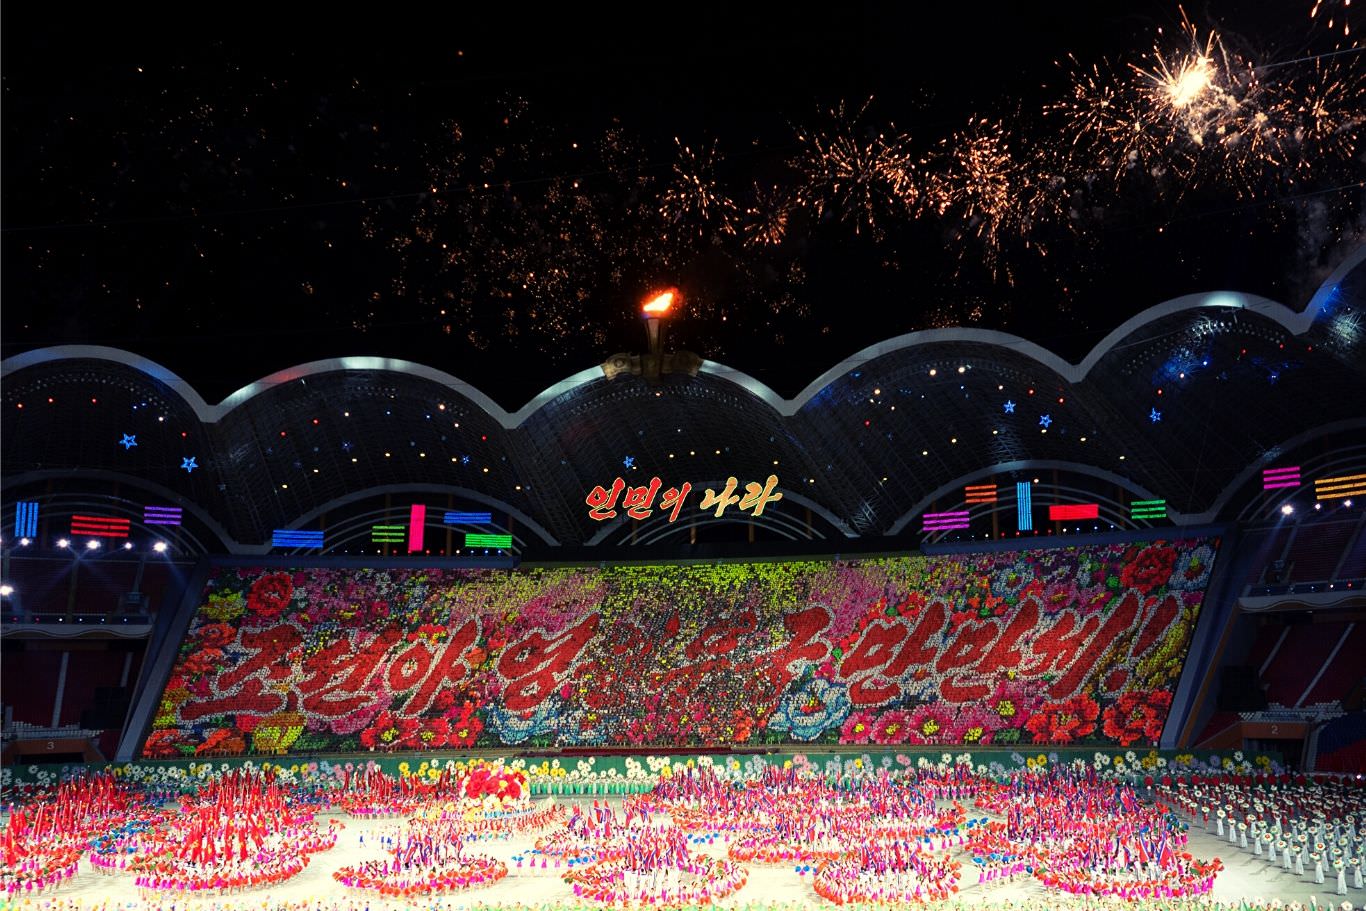 Mass Games finale, May Day Stadium, North Korea aka DPRK. Tour arranged by KTG Tours